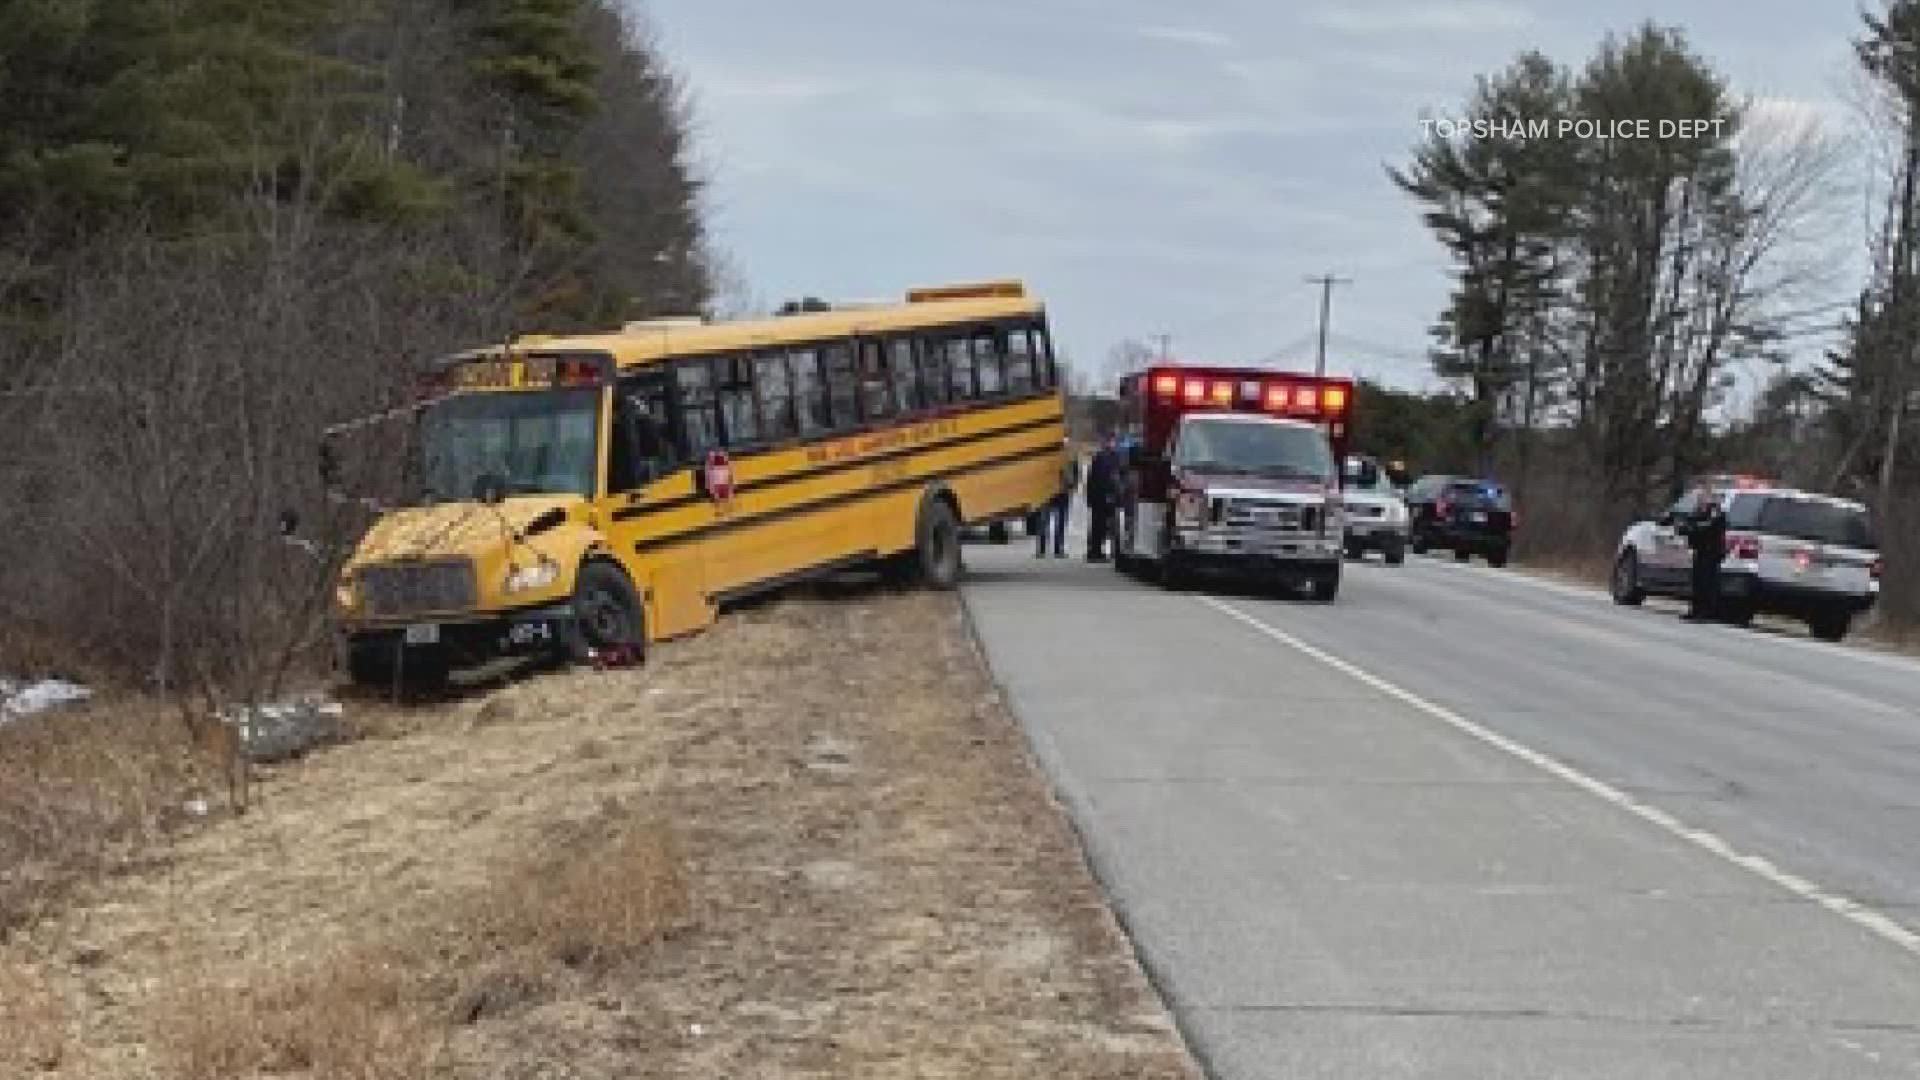 Connor and Seamus Collins were on a school bus on U.S. Route 201 in Topsham on Monday when the driver collapsed at the wheel.